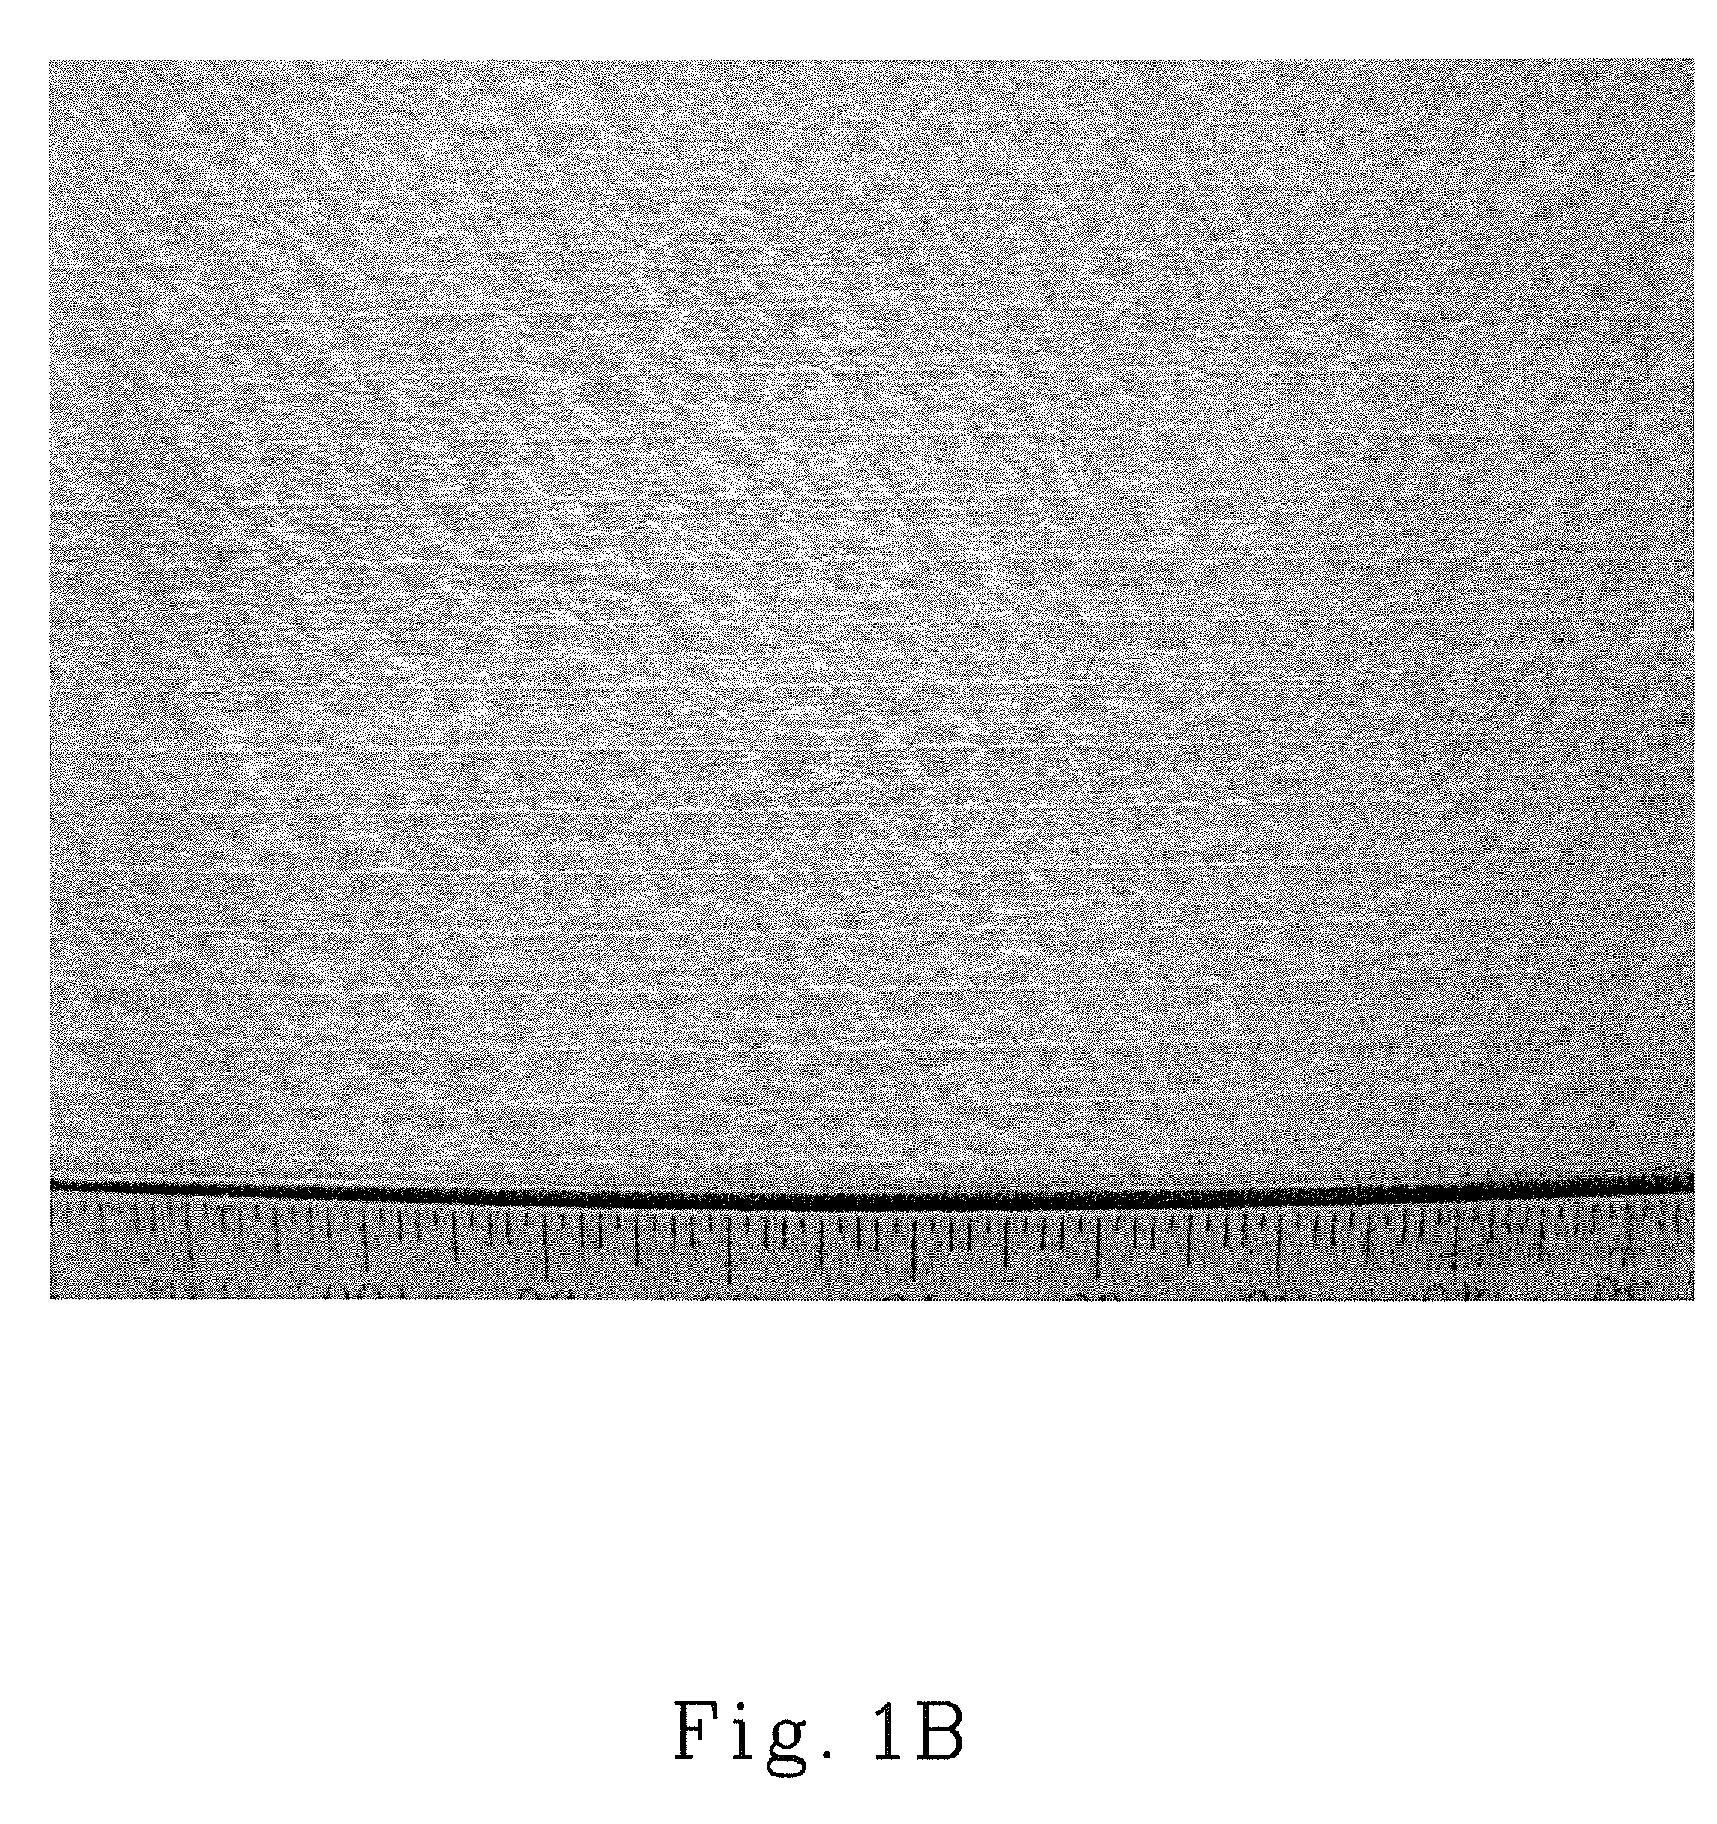 Method and Apparatus for Incrementally Stretching a Web